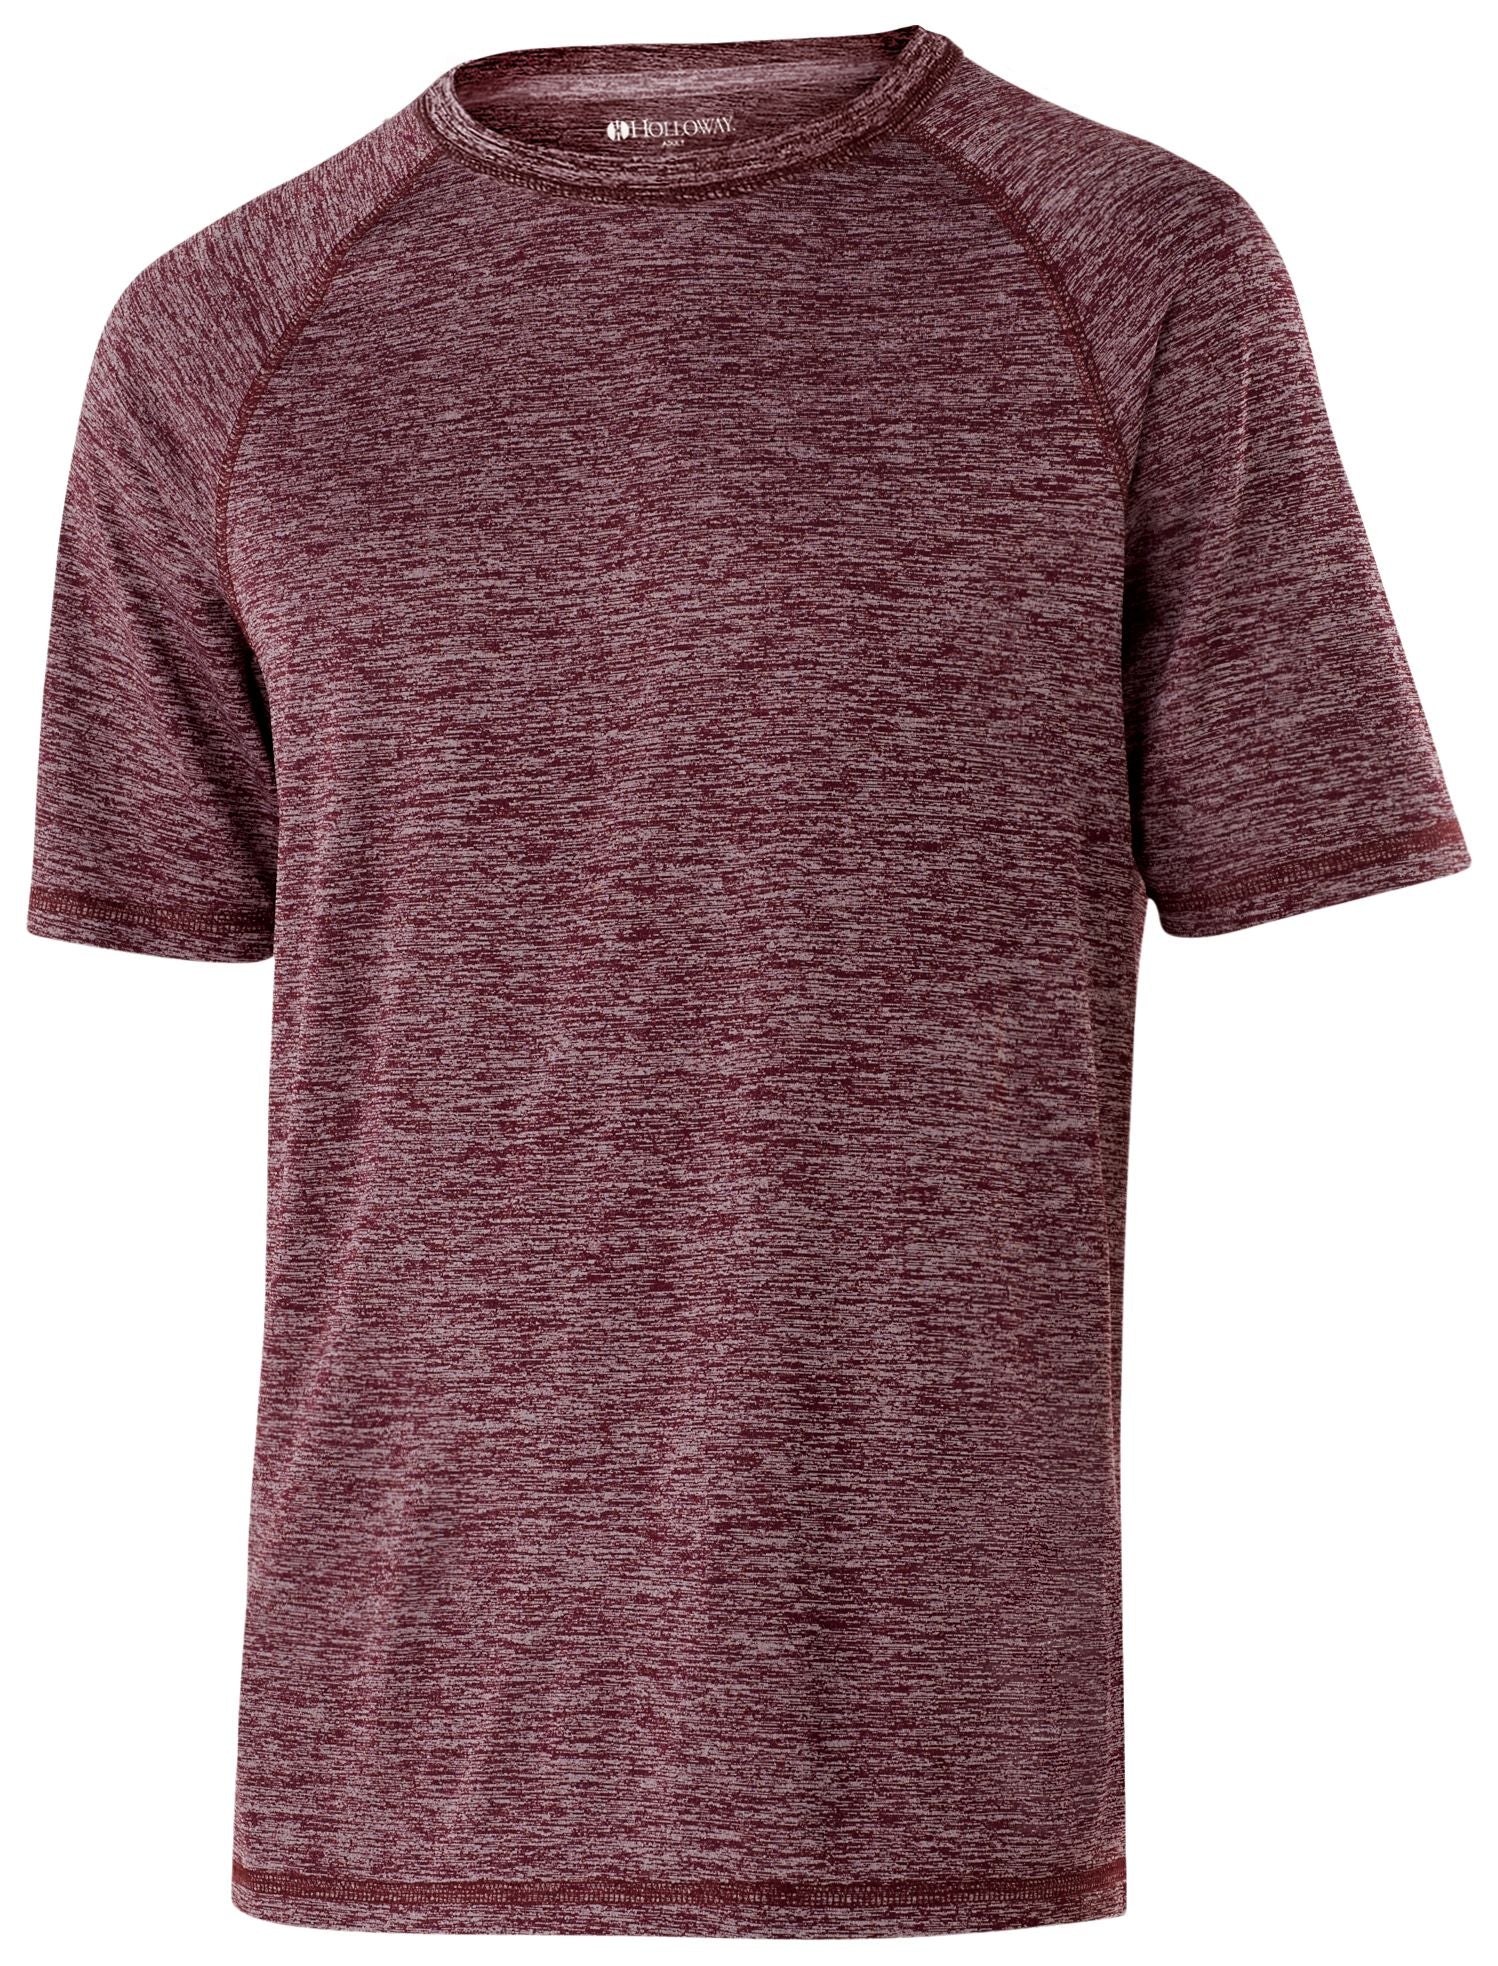 Holloway Electrify 2.0 Short Sleeve Shirt in Maroon Heather  -Part of the Adult, Holloway, Shirts product lines at KanaleyCreations.com